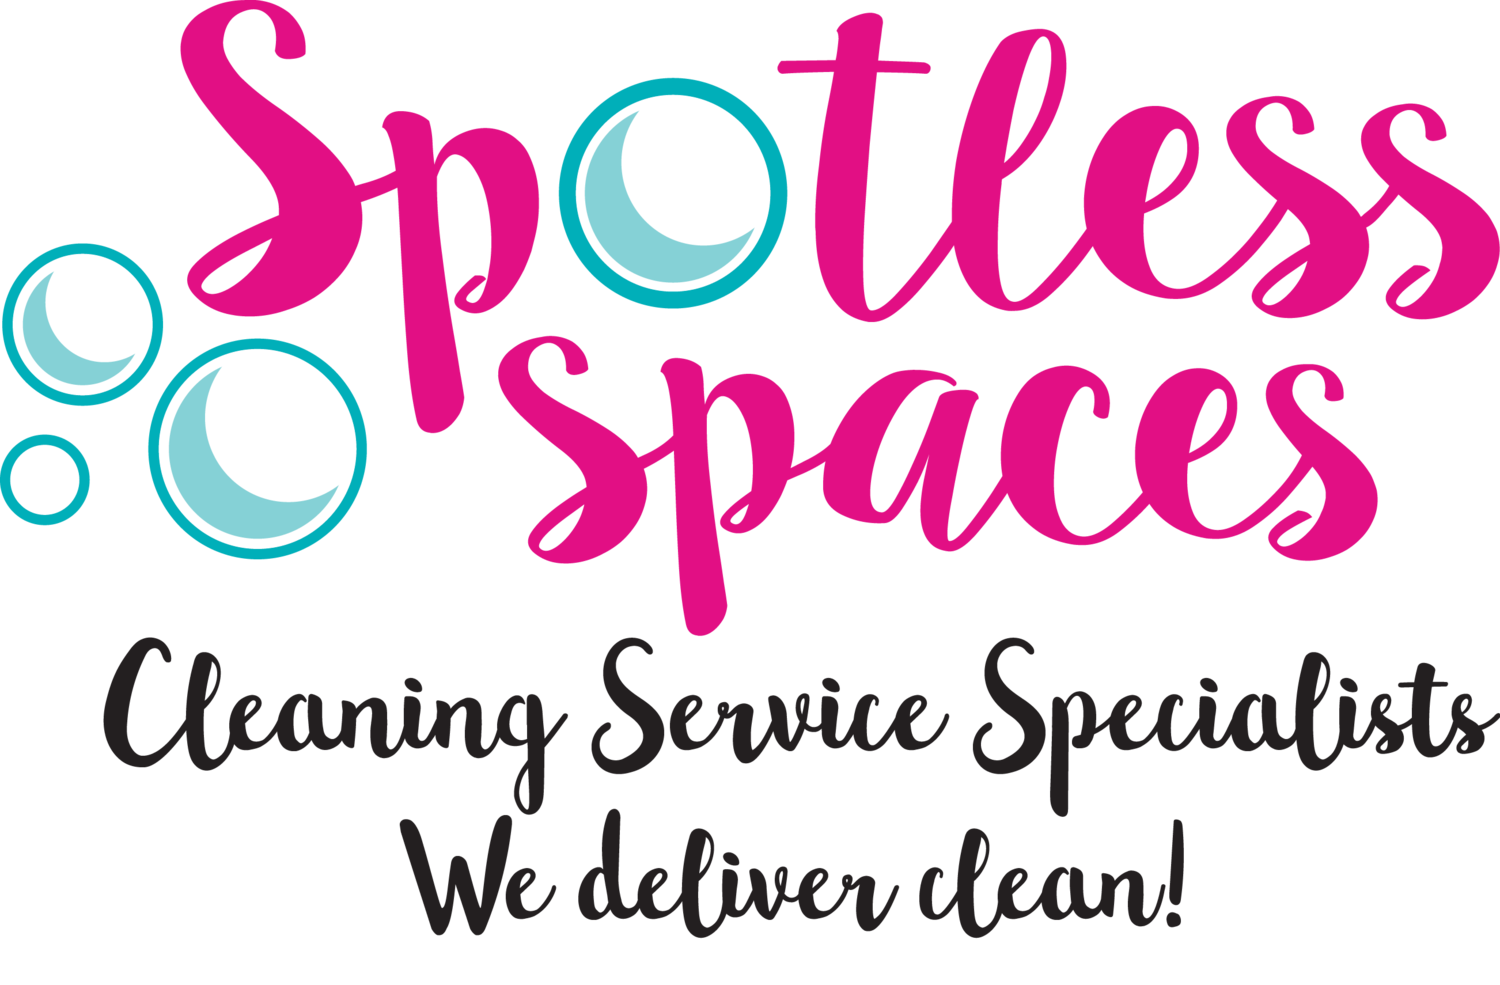 Spotless Spaces Cleaning LLC